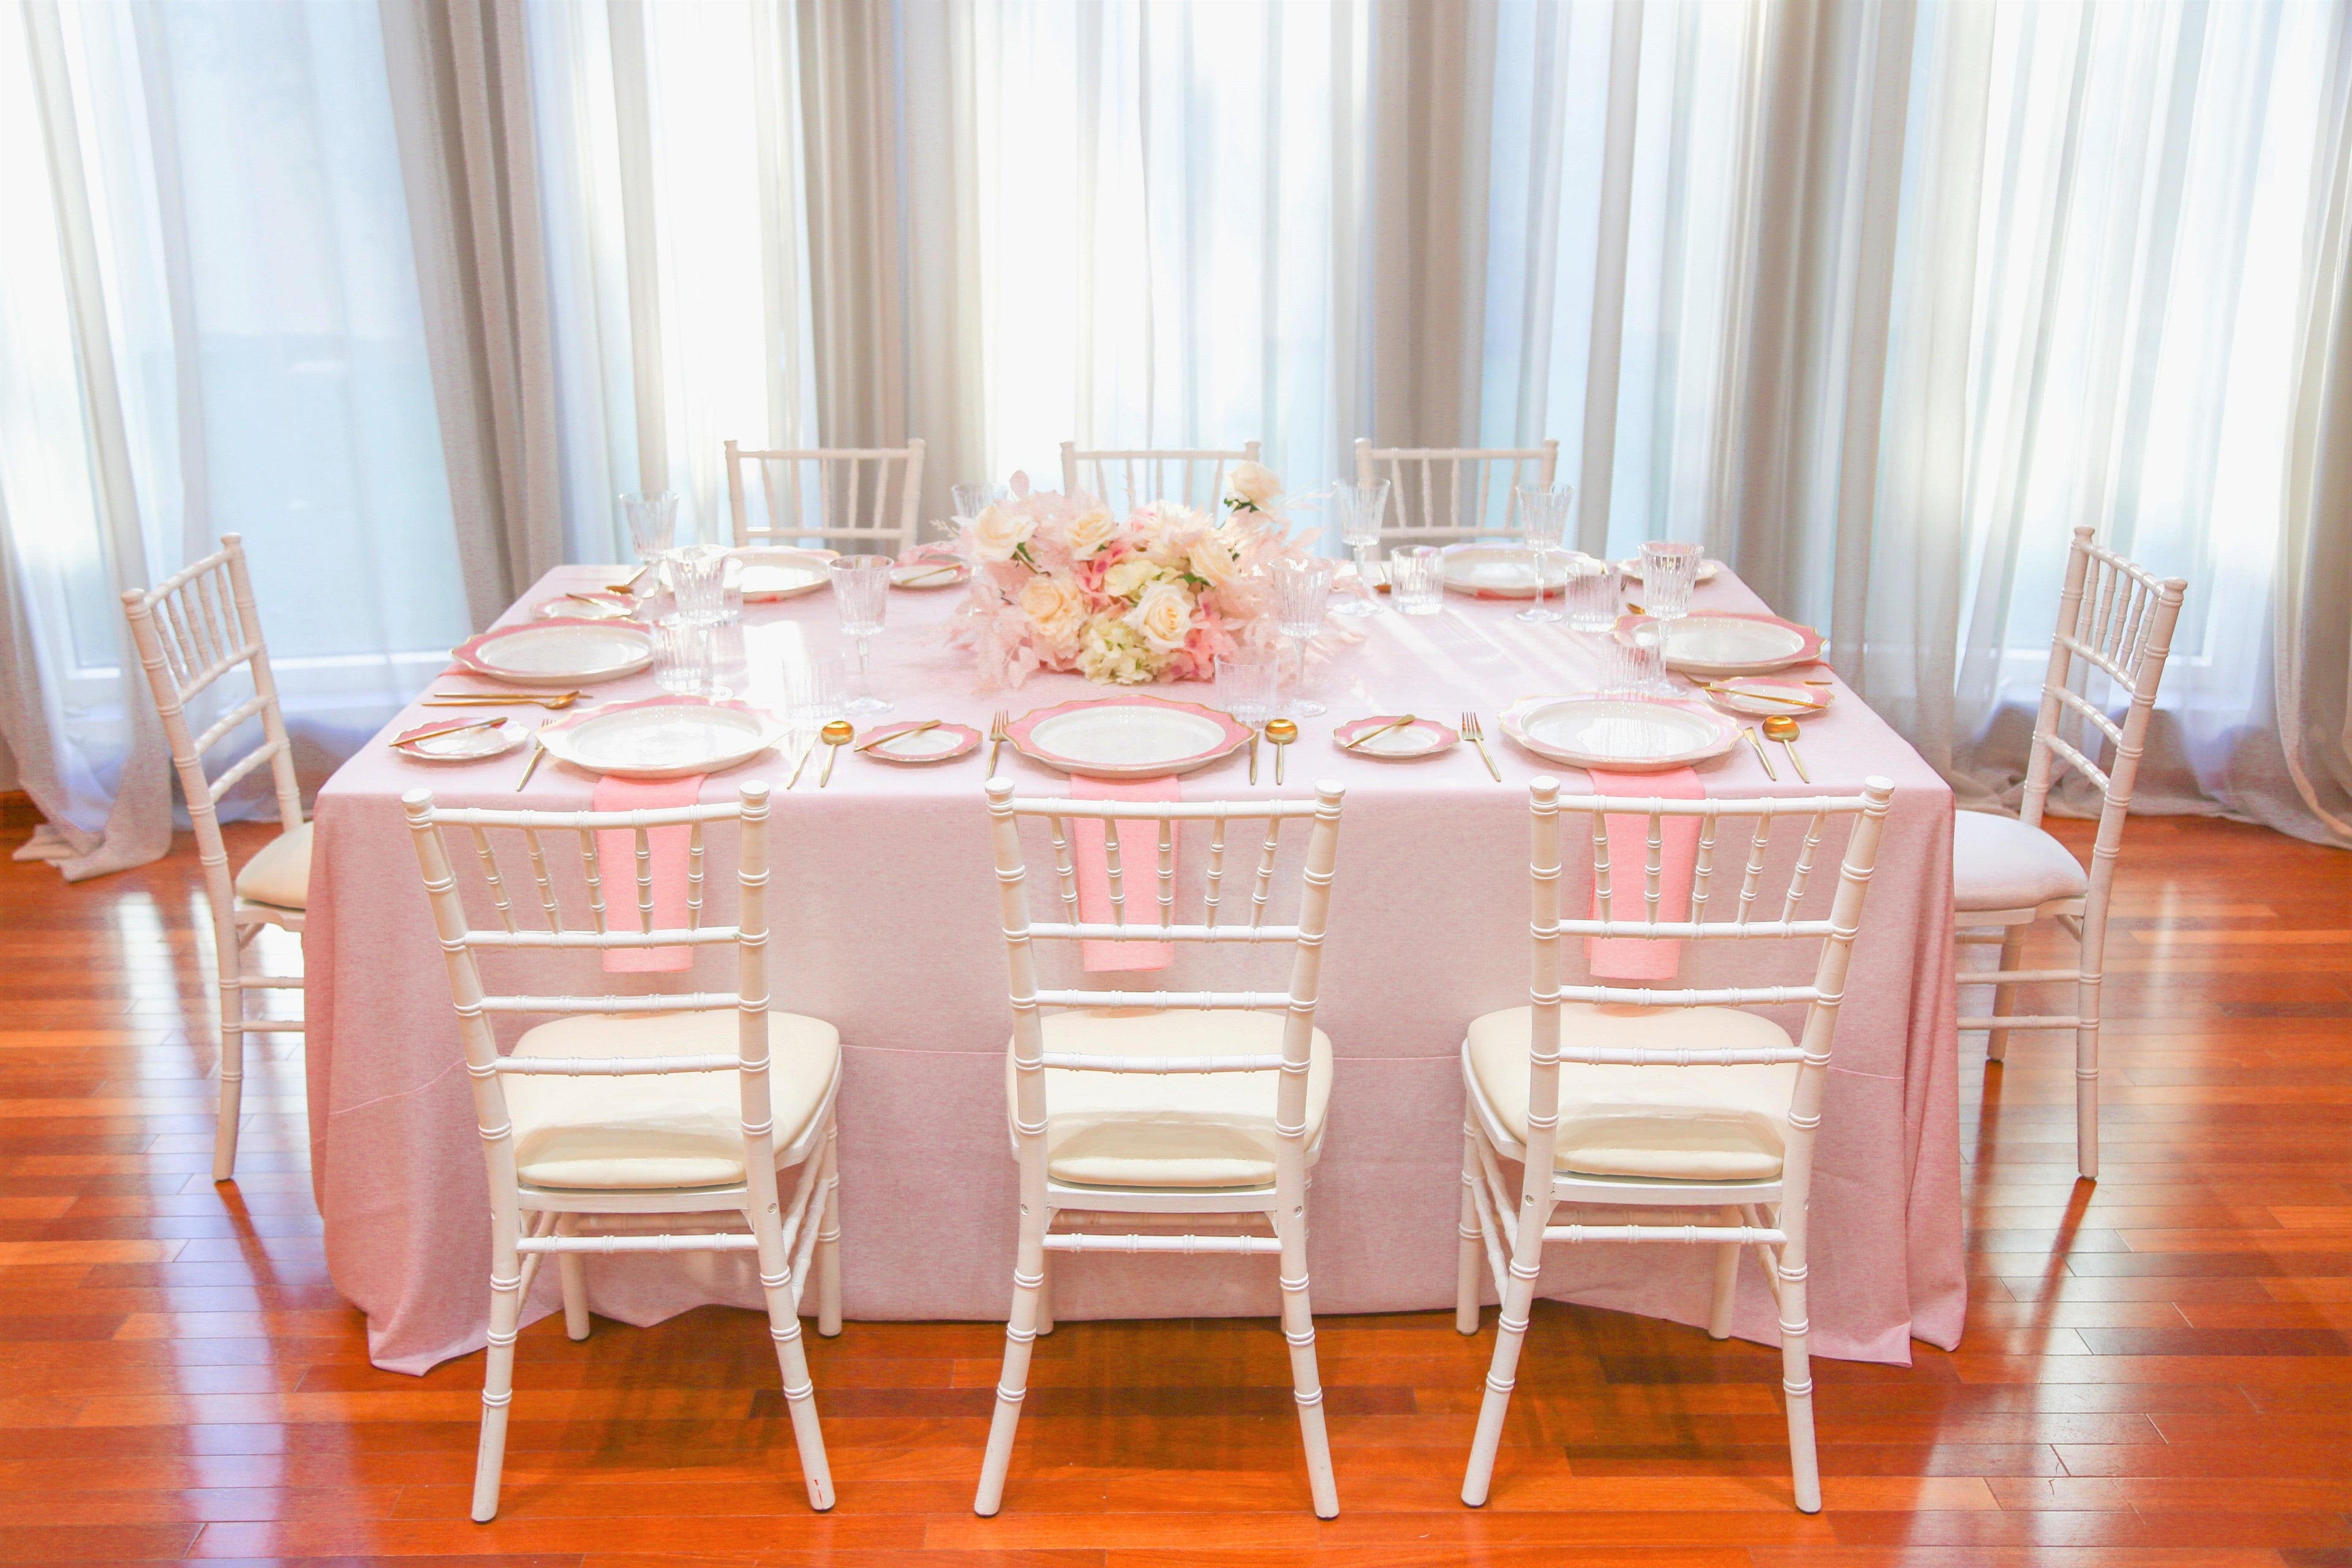 Pink Elegance table set for a party of 8 with chairs, tableware, and centrepieces. Rent everything you need for a remarkable event from Party Social.